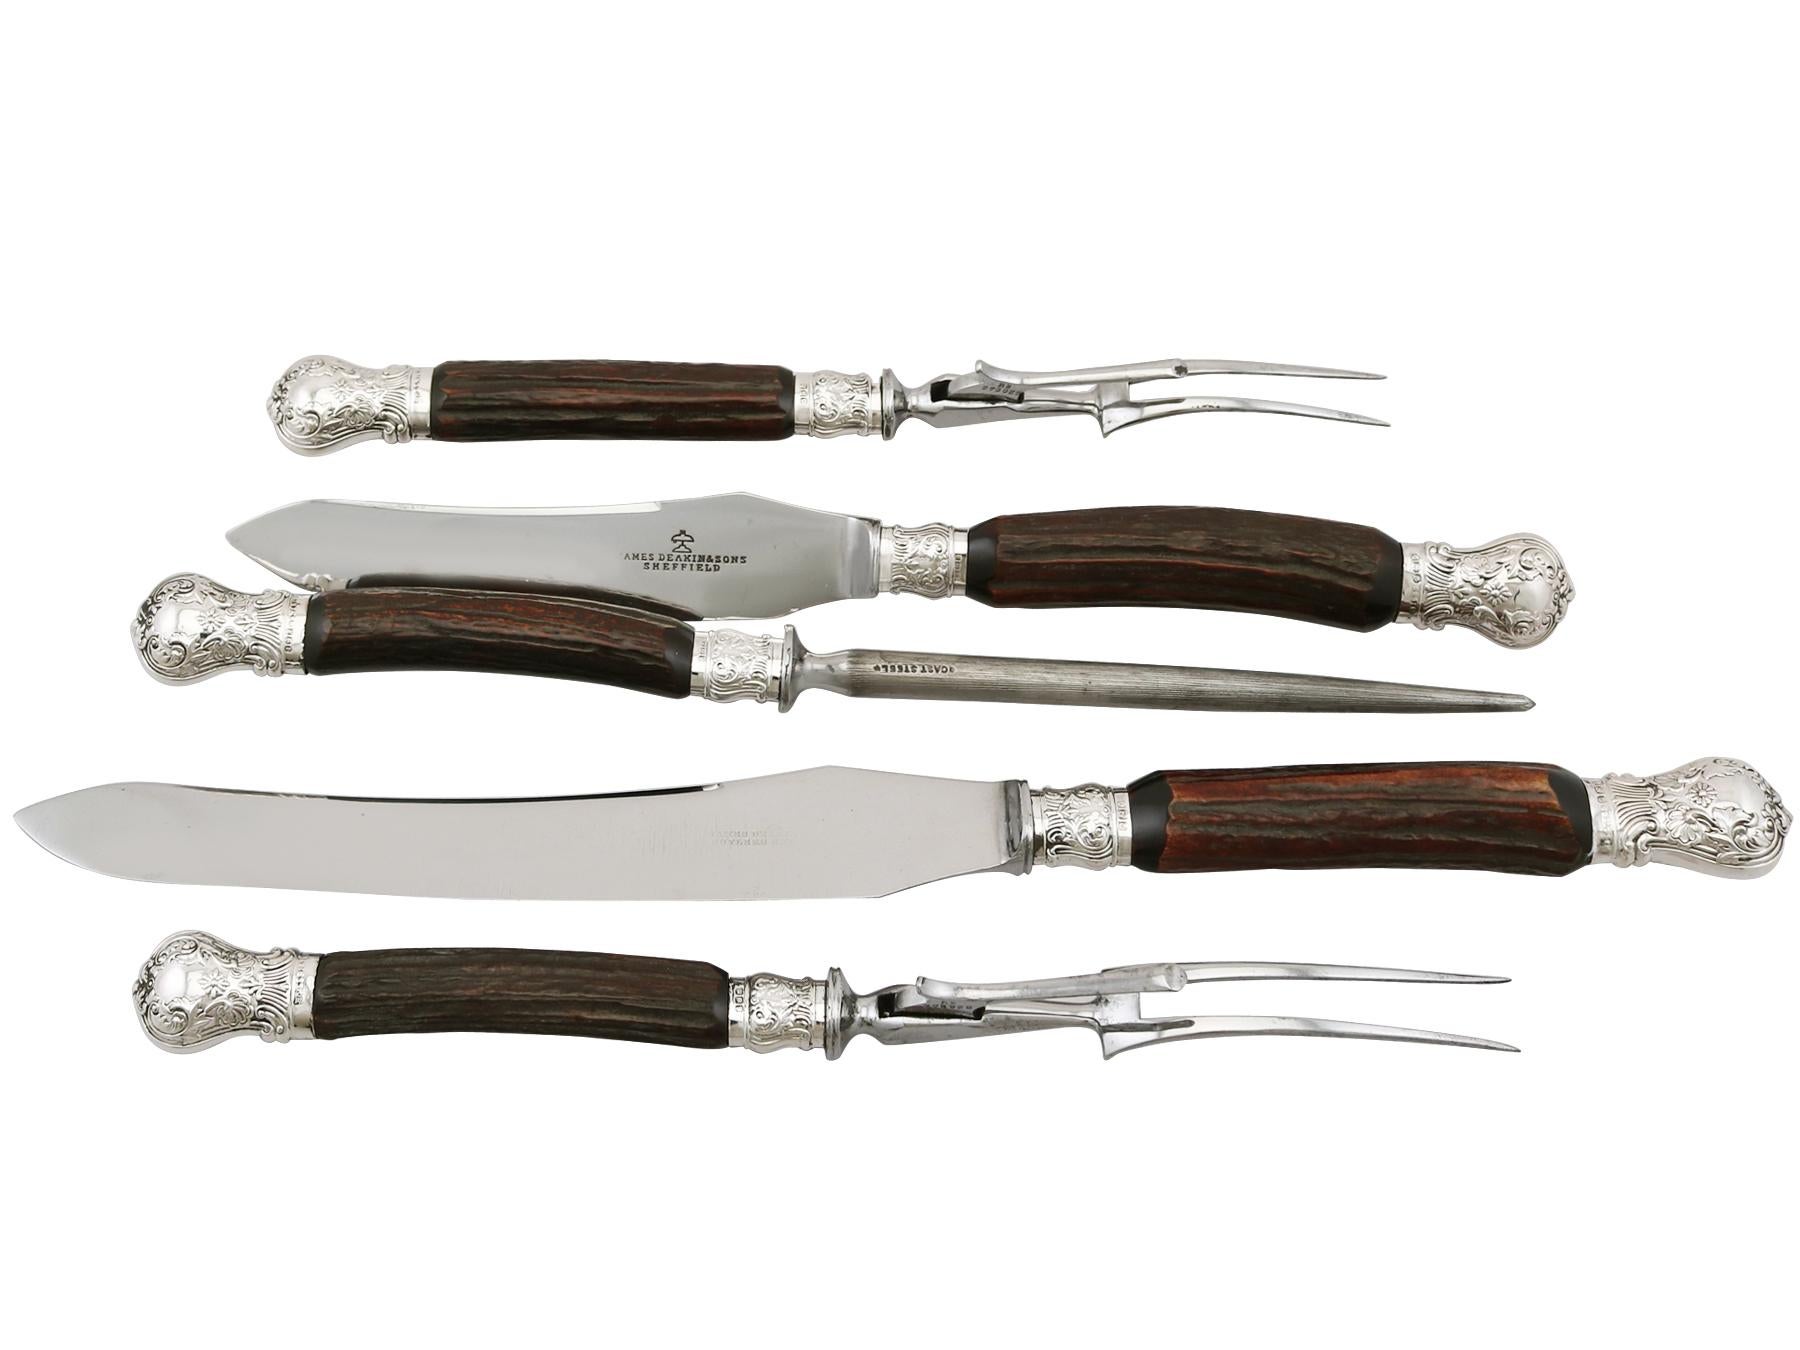 An exceptional, fine and impressive antique Victorian steel, horn handled and sterling silver mounted five piece carving set - boxed; an addition to our diverse dining silverware collection.

This exceptional antique Victorian sterling silver